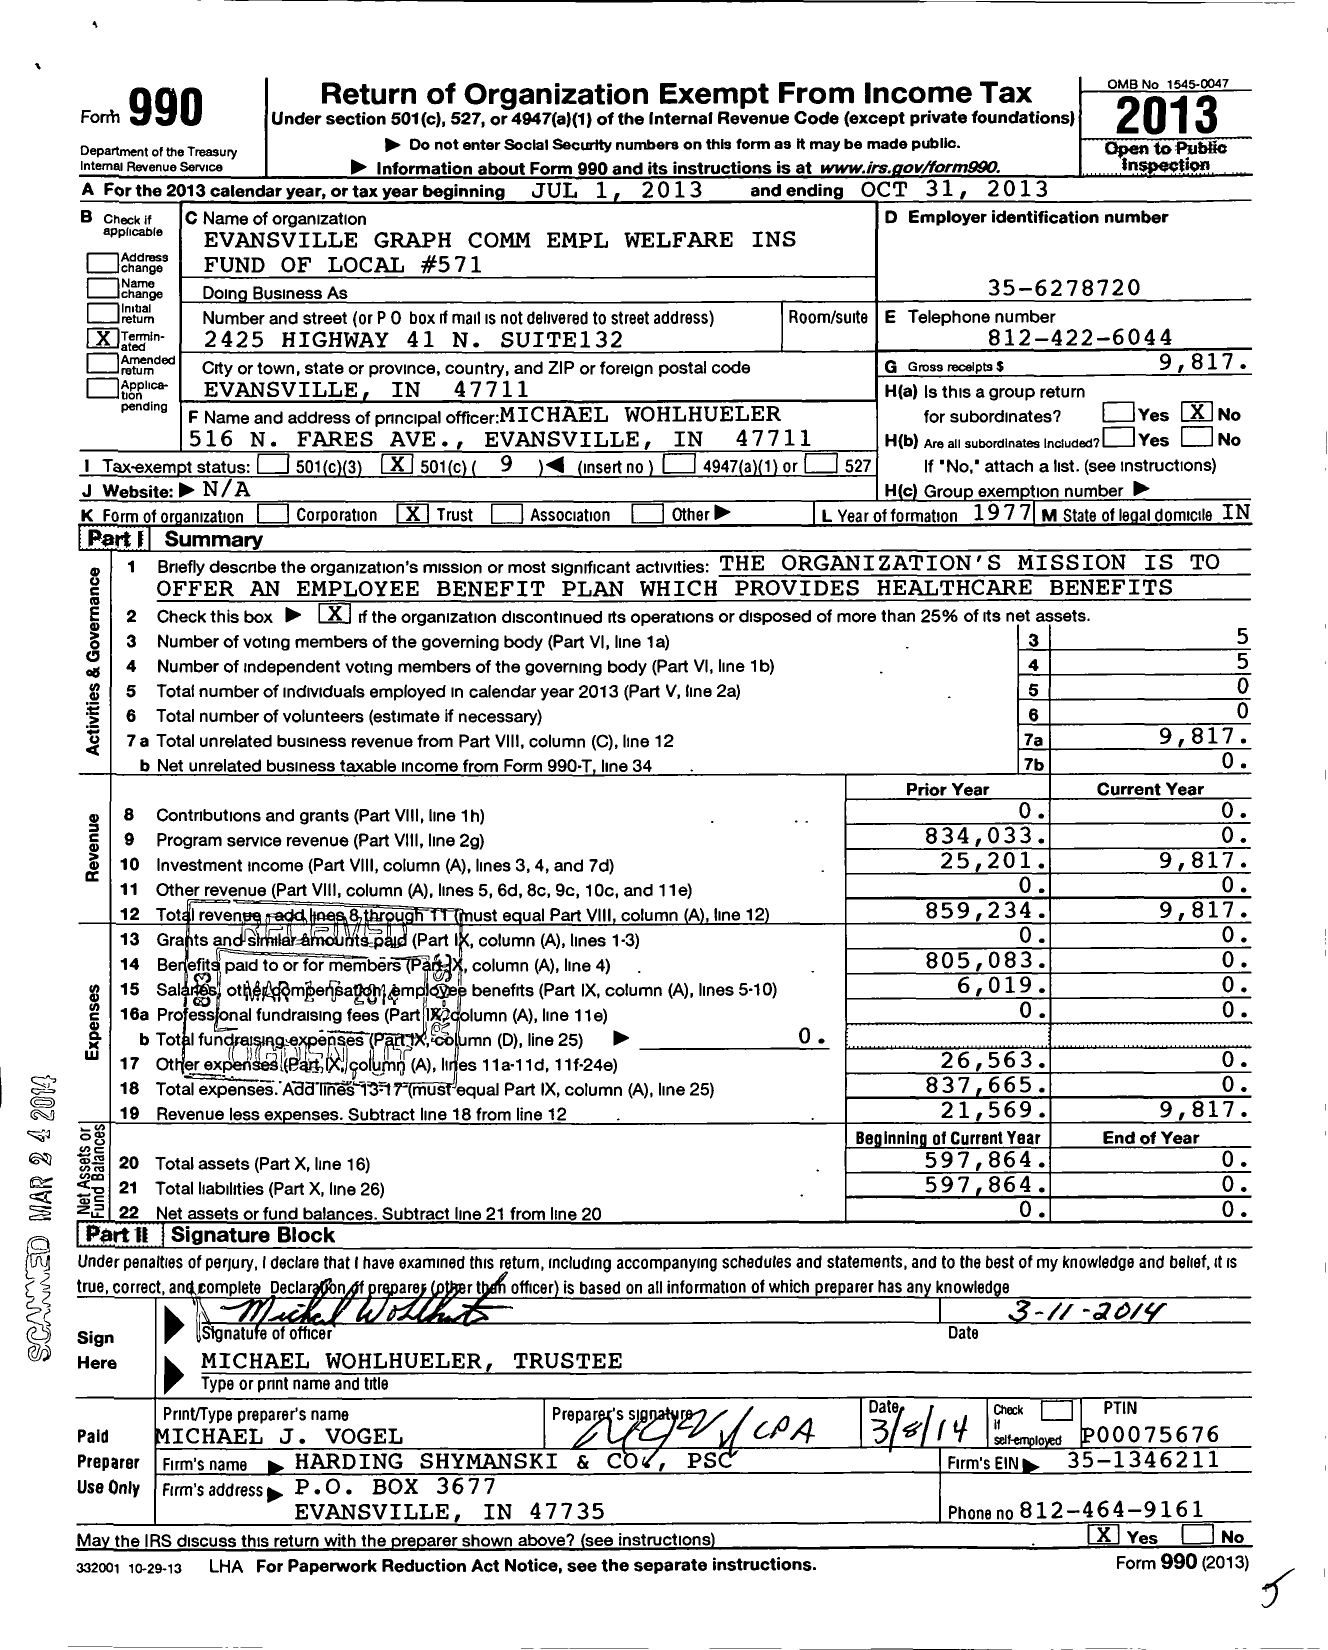 Image of first page of 2012 Form 990O for Evansville Graph Comm Empl Welfare Ins Fund of Local 571